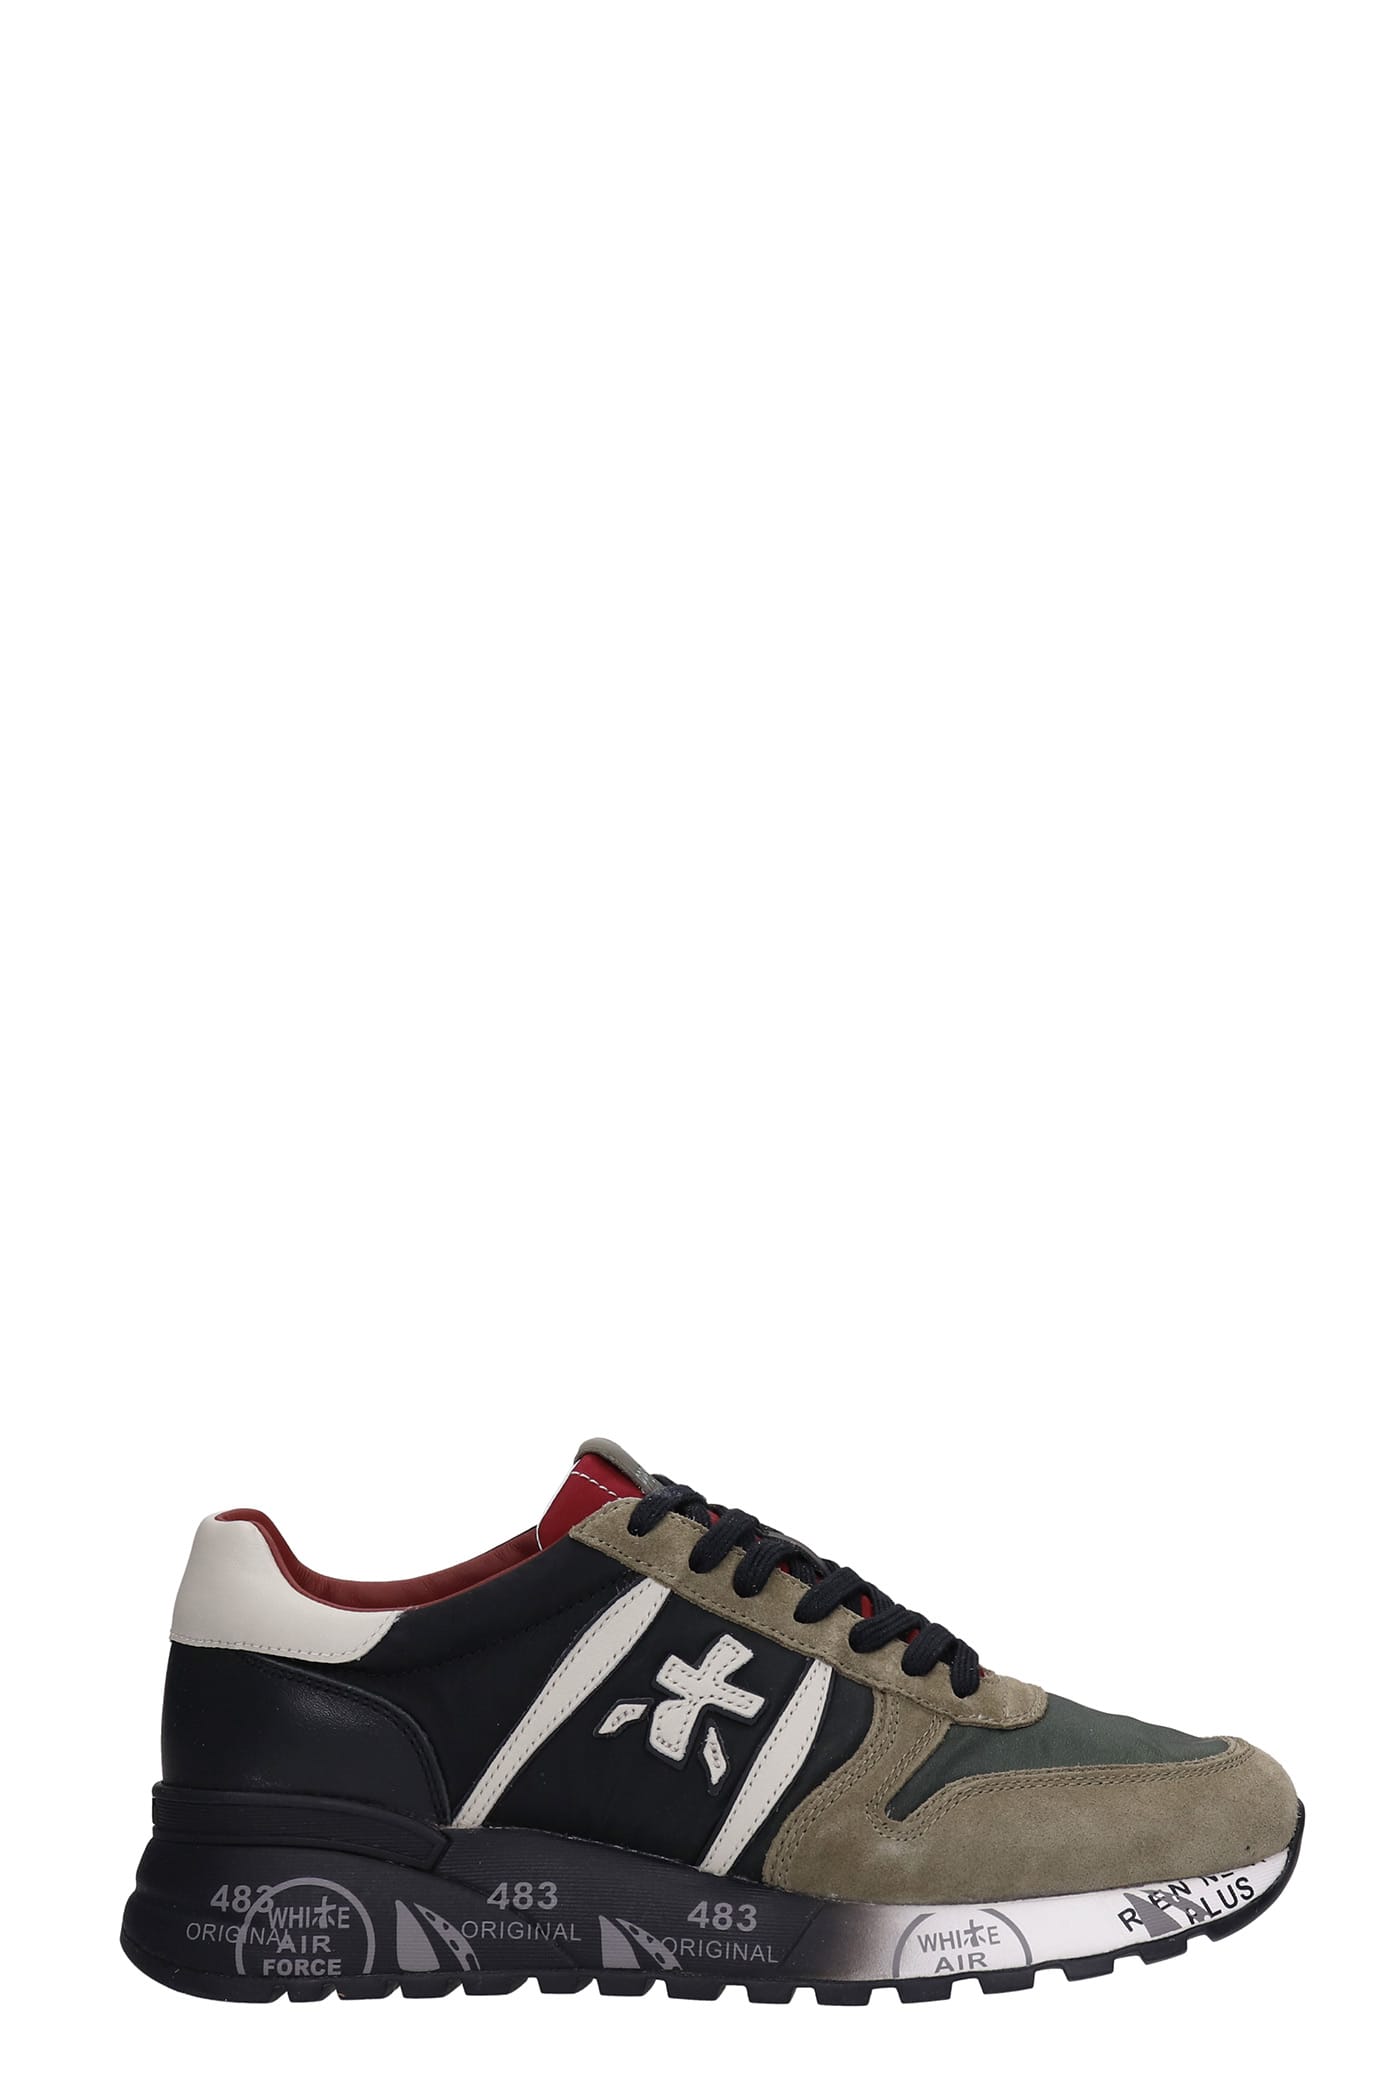 Premiata Lander Sneakers In Green Suede And Fabric